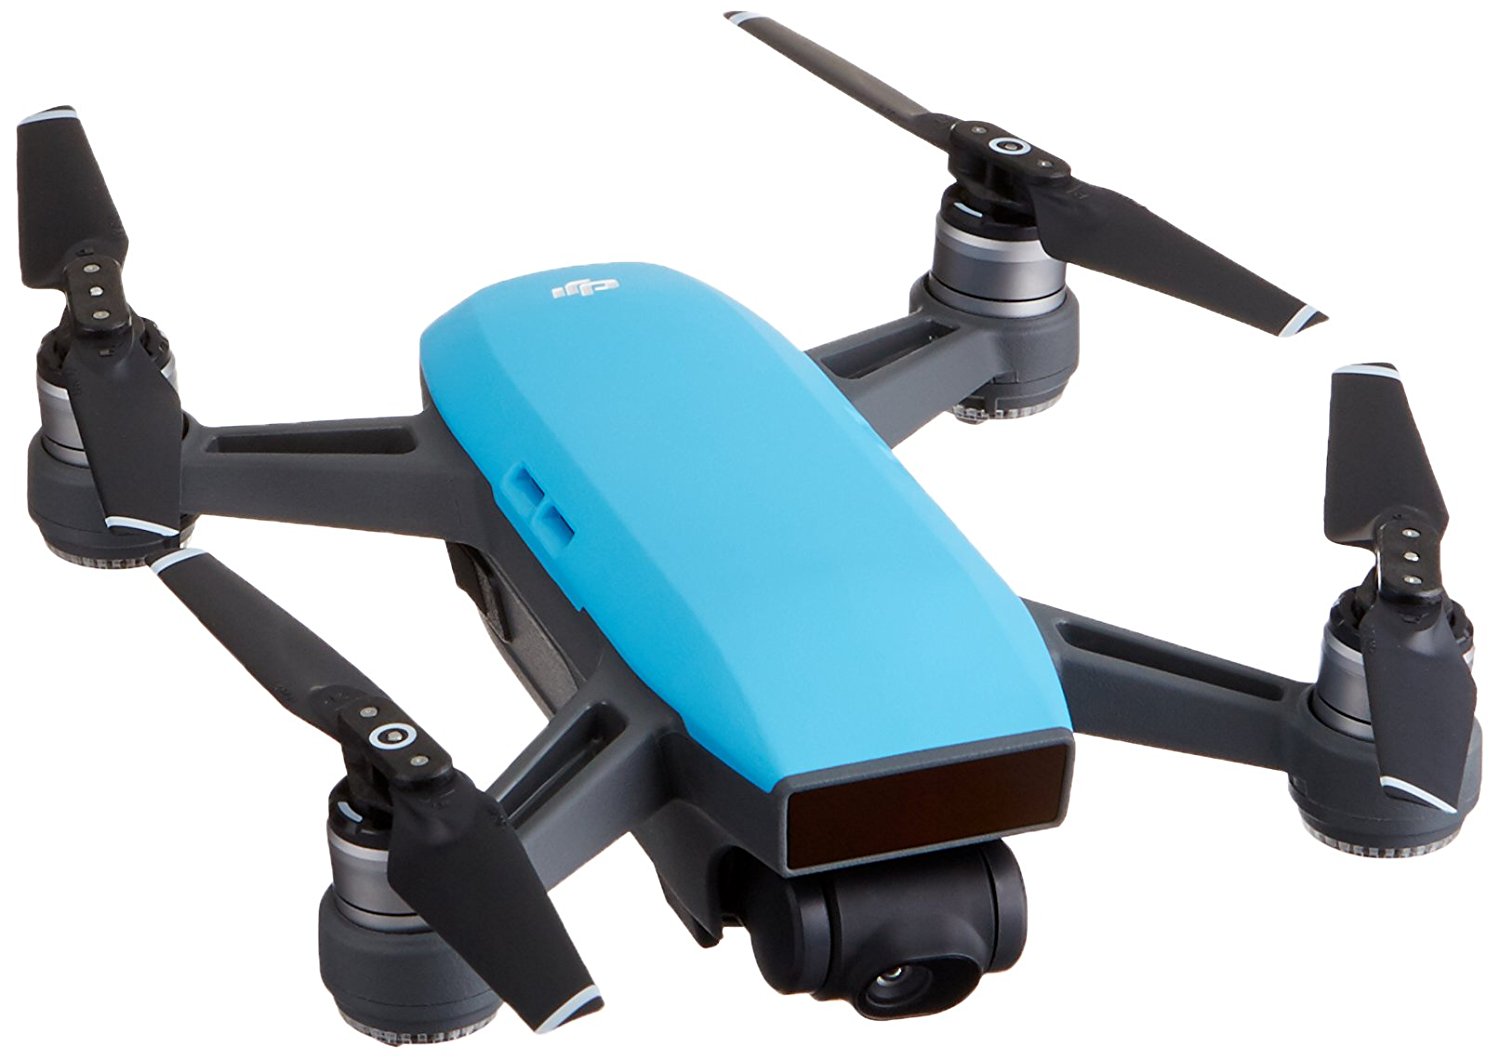 best drones for 300